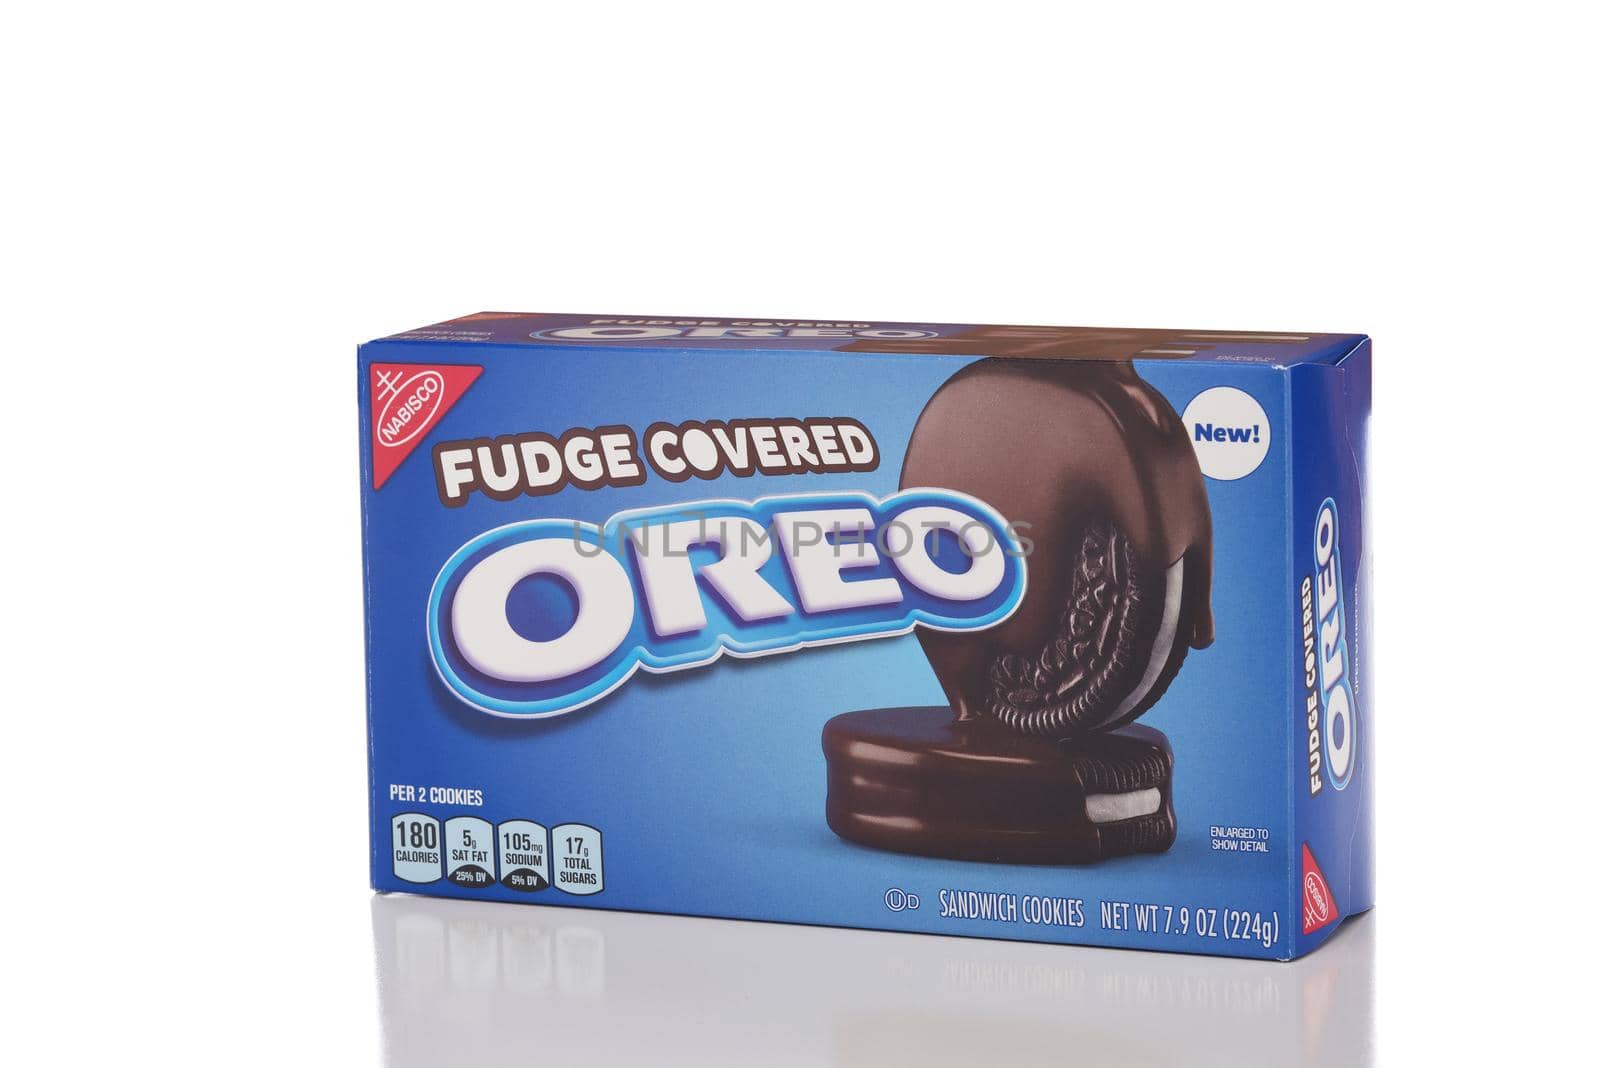 A package of Nabisco Fudge Covered Oreo cookies.  by sCukrov